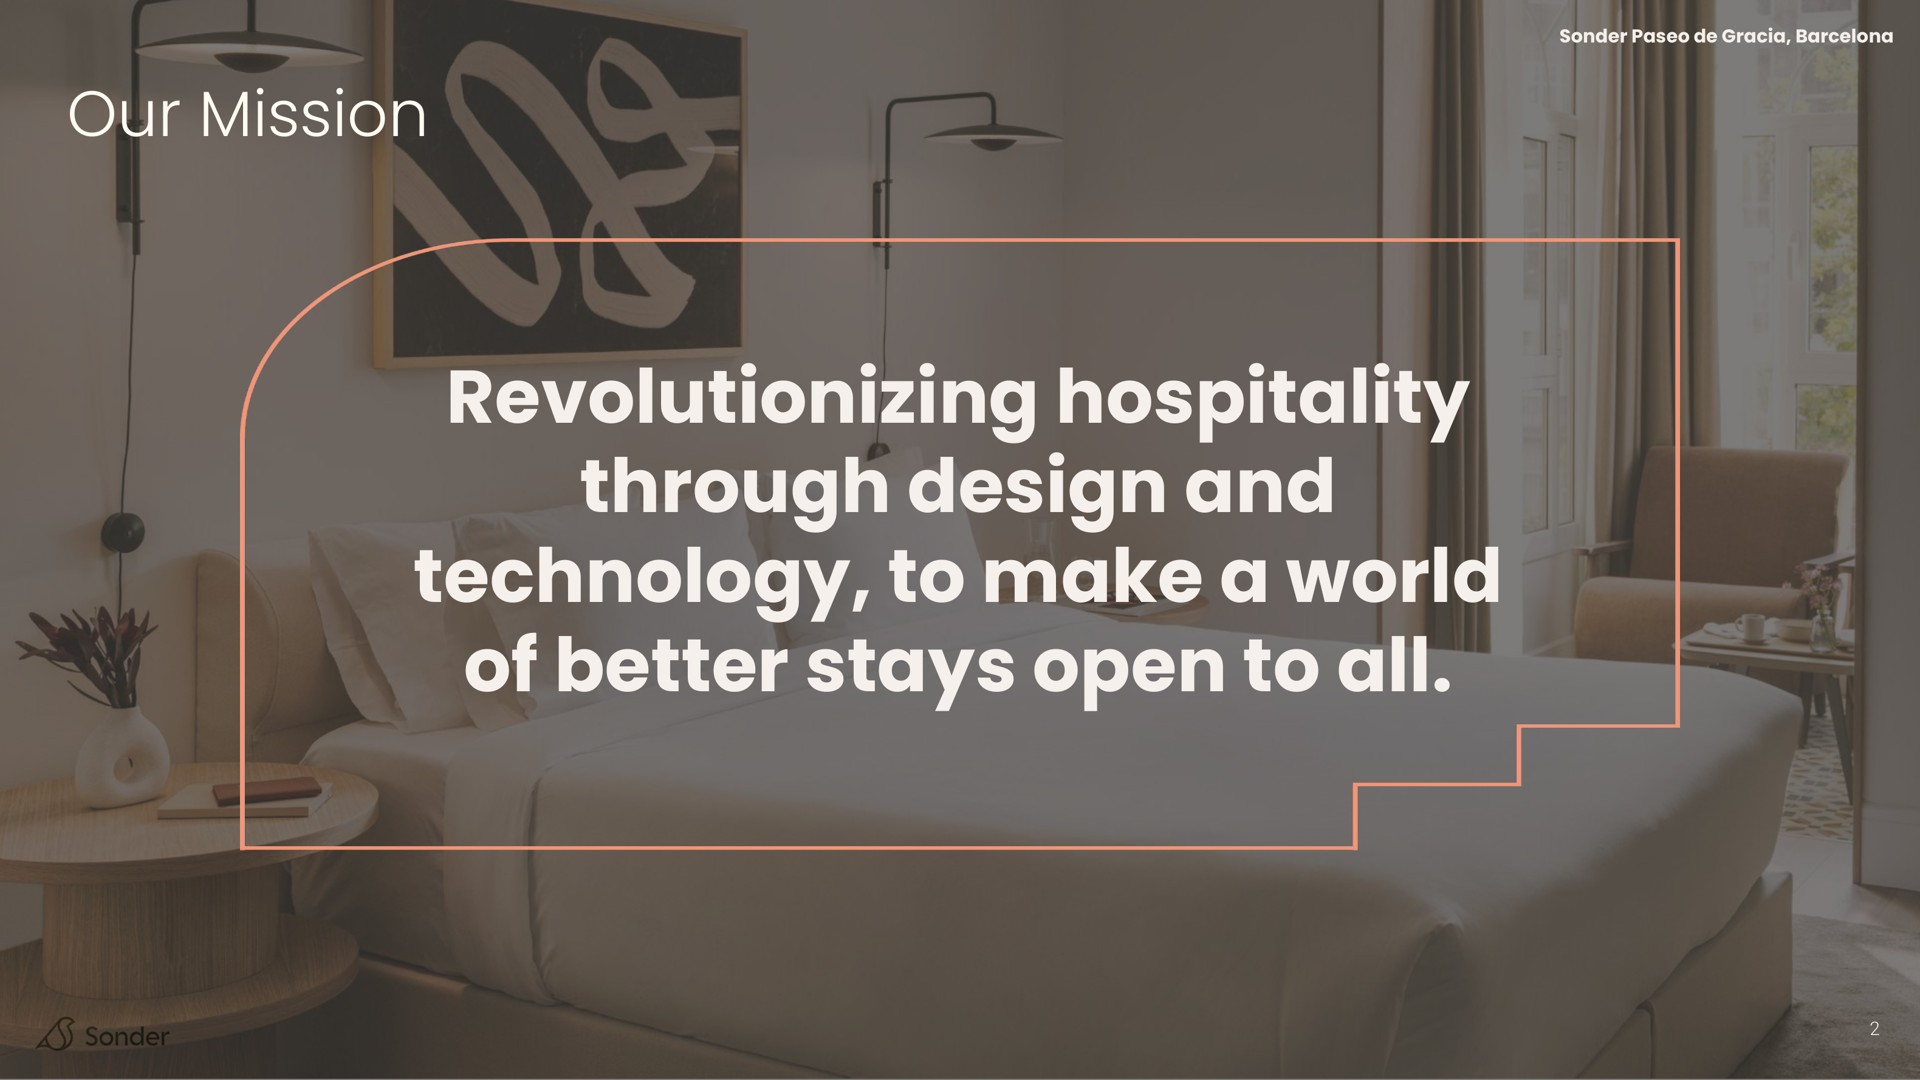 our mission revolutionizing hospitality through design and technology to make a world of better stays open to all | Sonder